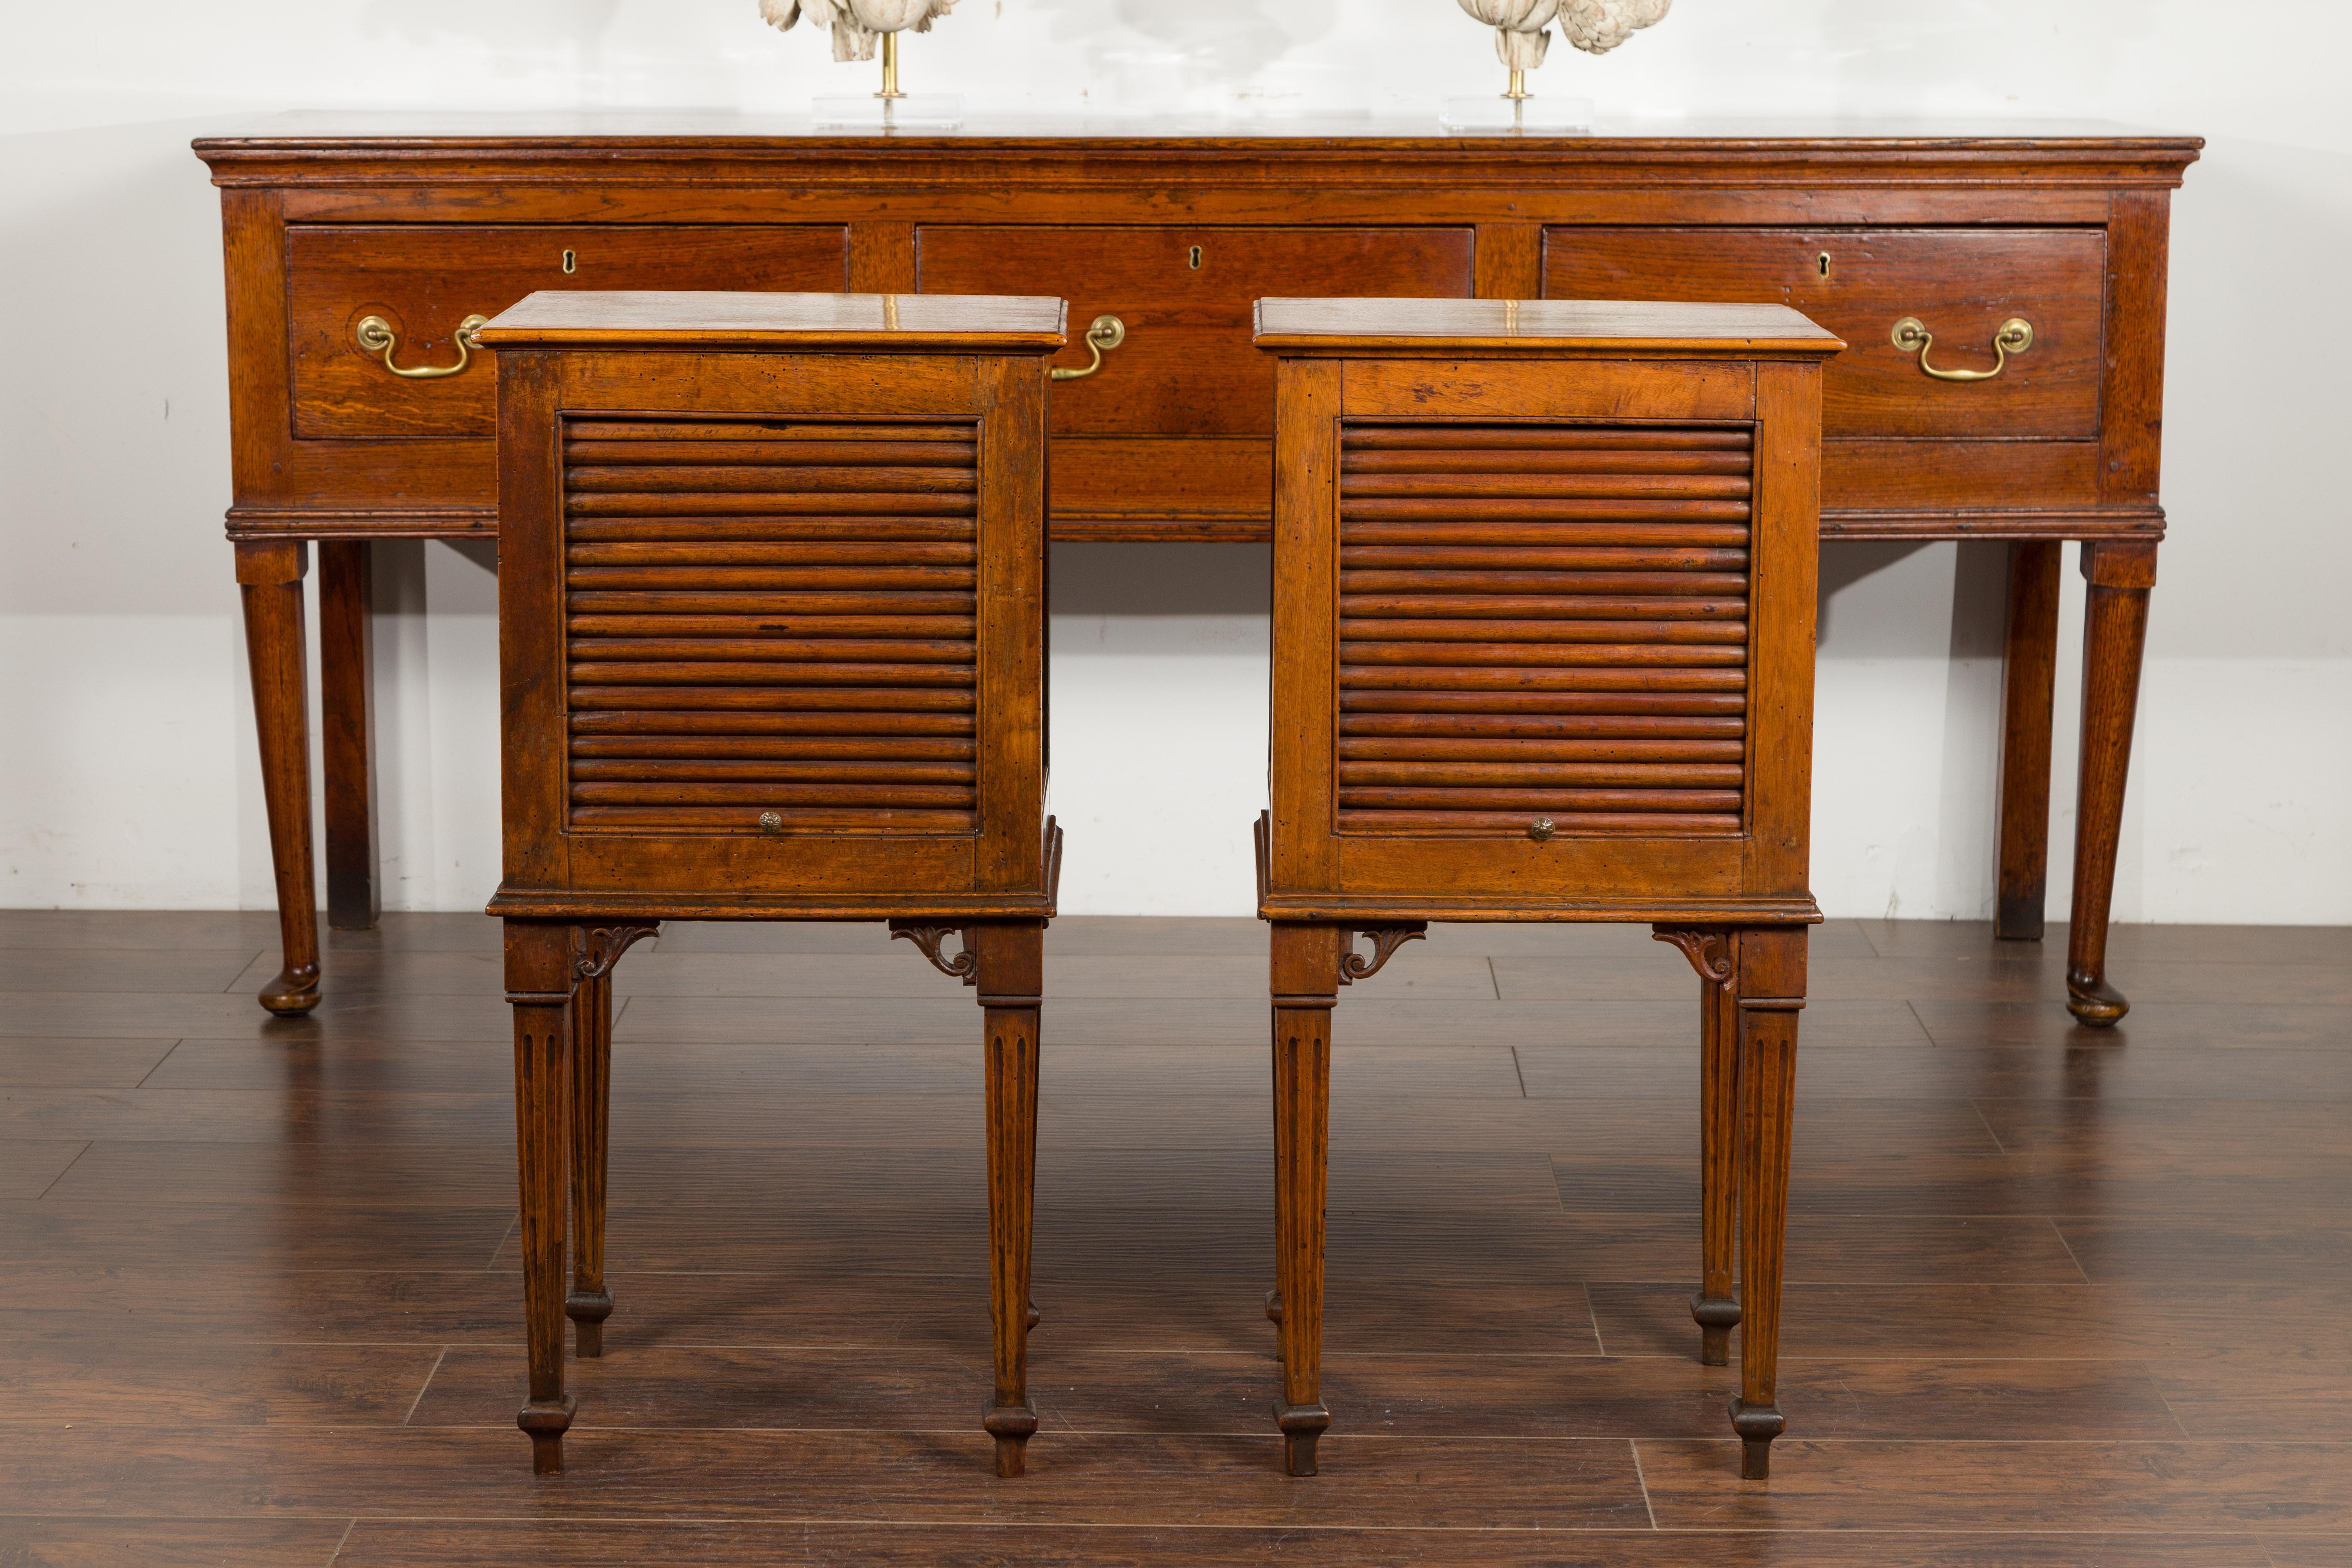 A pair of French Restauration period walnut tambour door tables from the mid-19th century, with tapered fluted legs. Created in France during the Restauration period, each of this pair of walnut tables features a rectangular top sitting above a